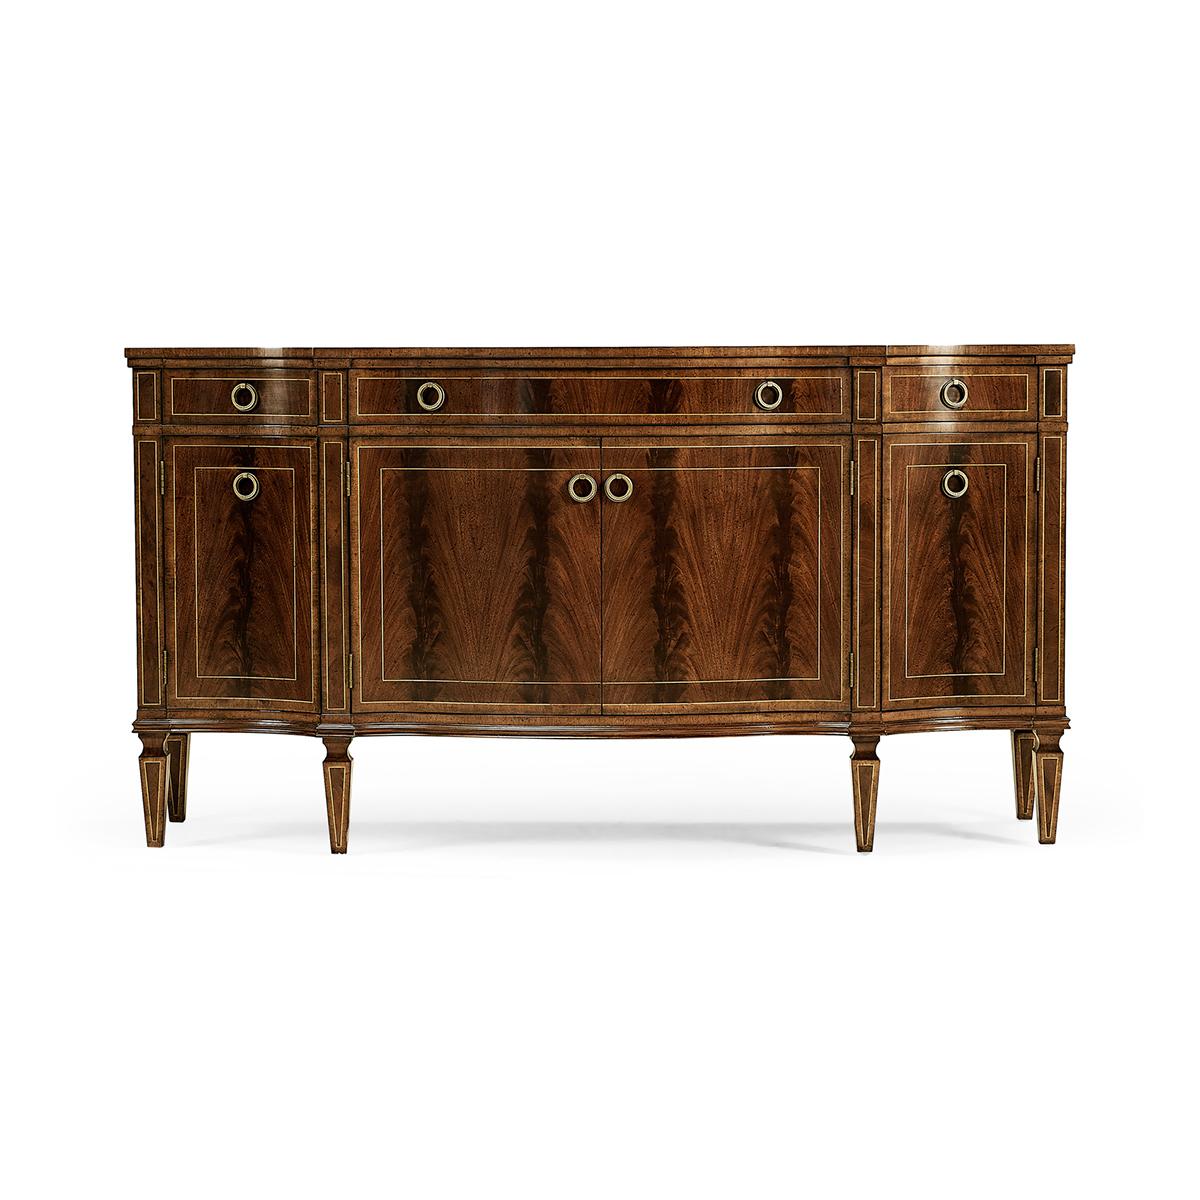 Substantial George III style bow fronted serpentine sideboard with four doors, flame mahogany veneers, and three drawers to the upper register. Contrasting stringing throughout and raised on square cross-section feet. 

Dimensions: 72.75